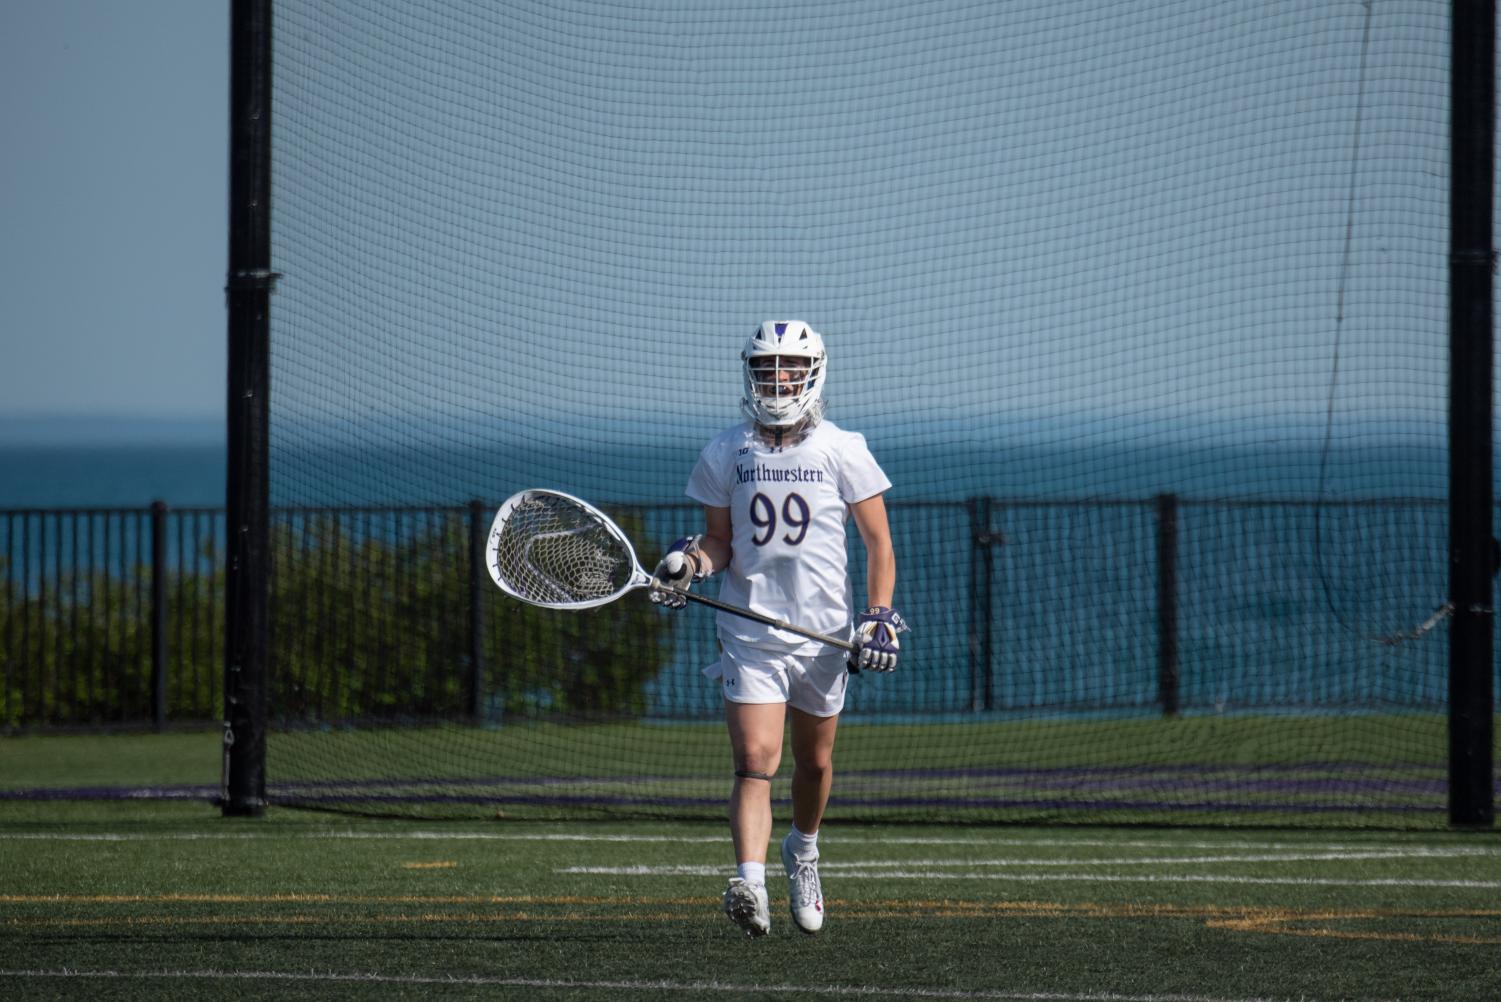 A player wearing a white jersey and holding a goalie lacrosse stick walks across a field.